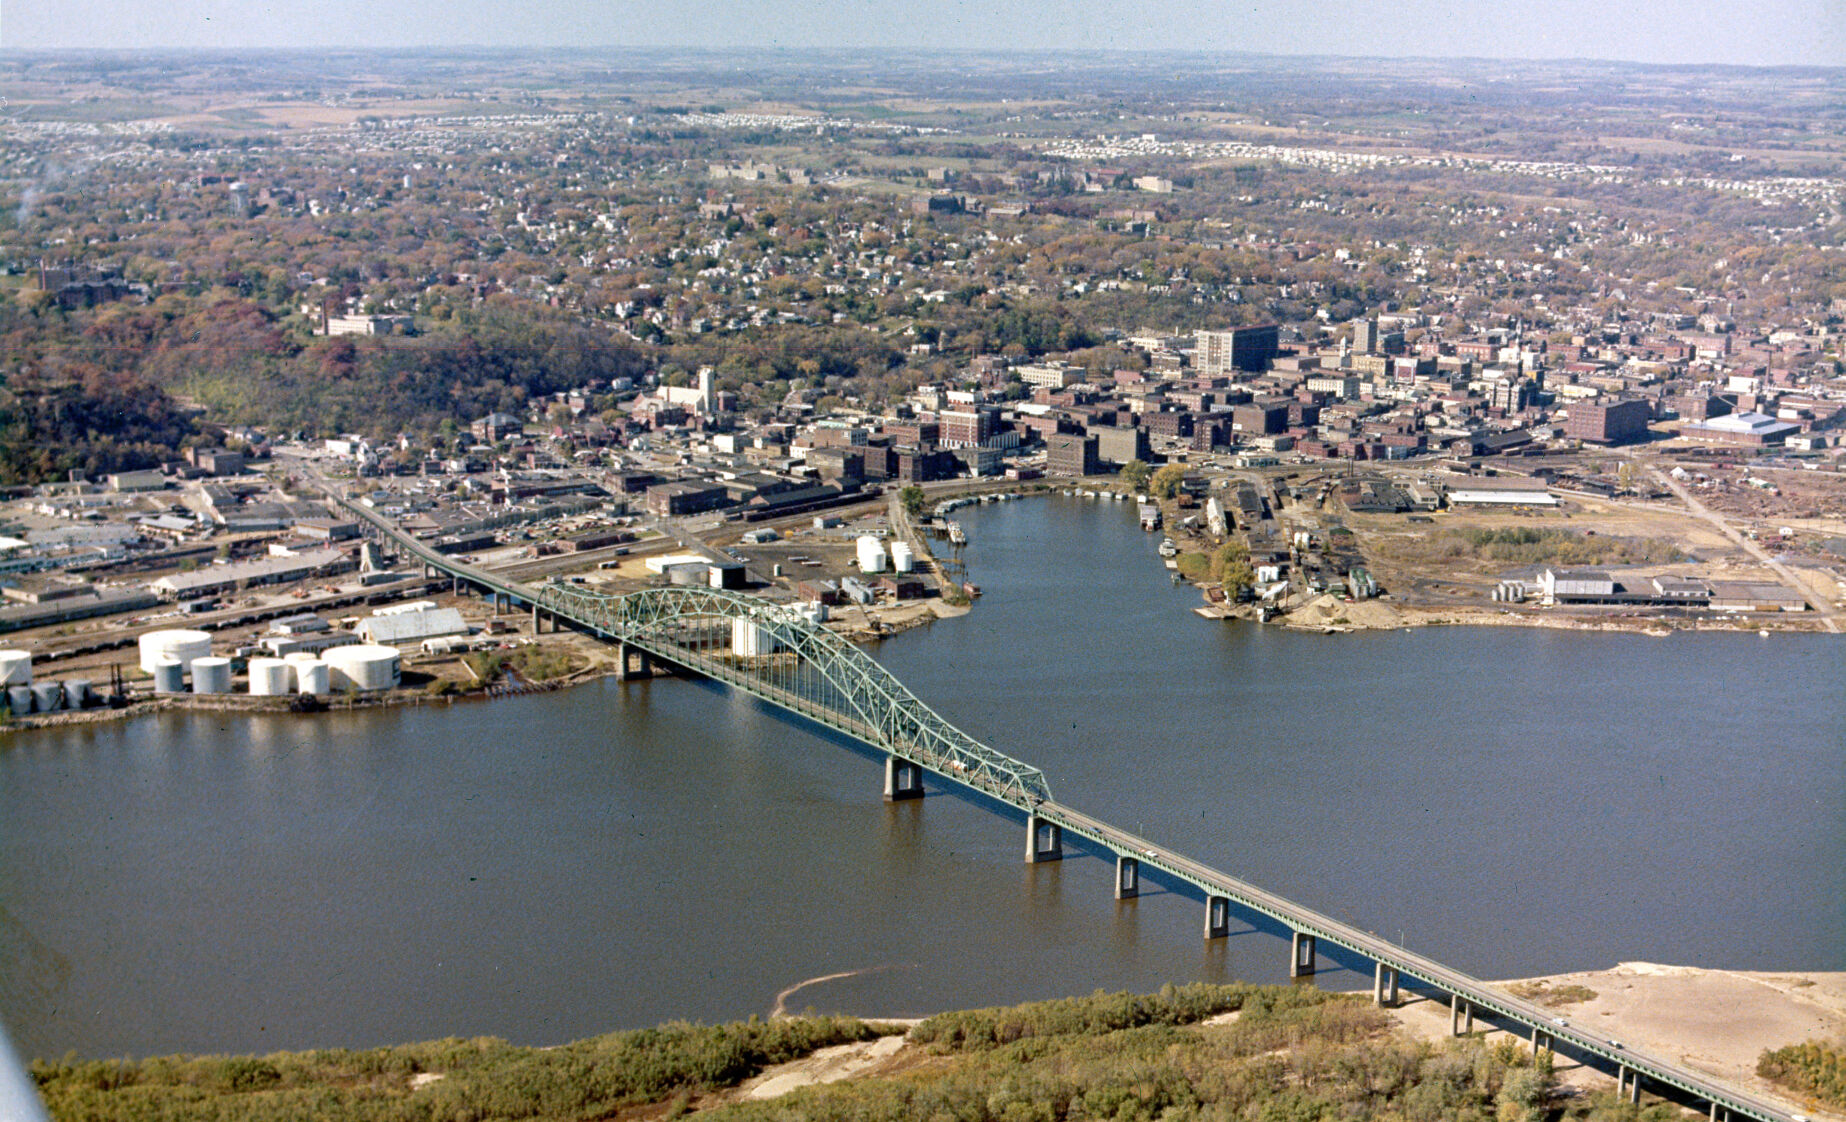 Publication date unknown: Aerial view of the city of Dubuque, showing the Julien Dubuque Bridge, Ice Harbor and downtown. (Note: Photo taken 1977.)    PHOTO CREDIT: TH file